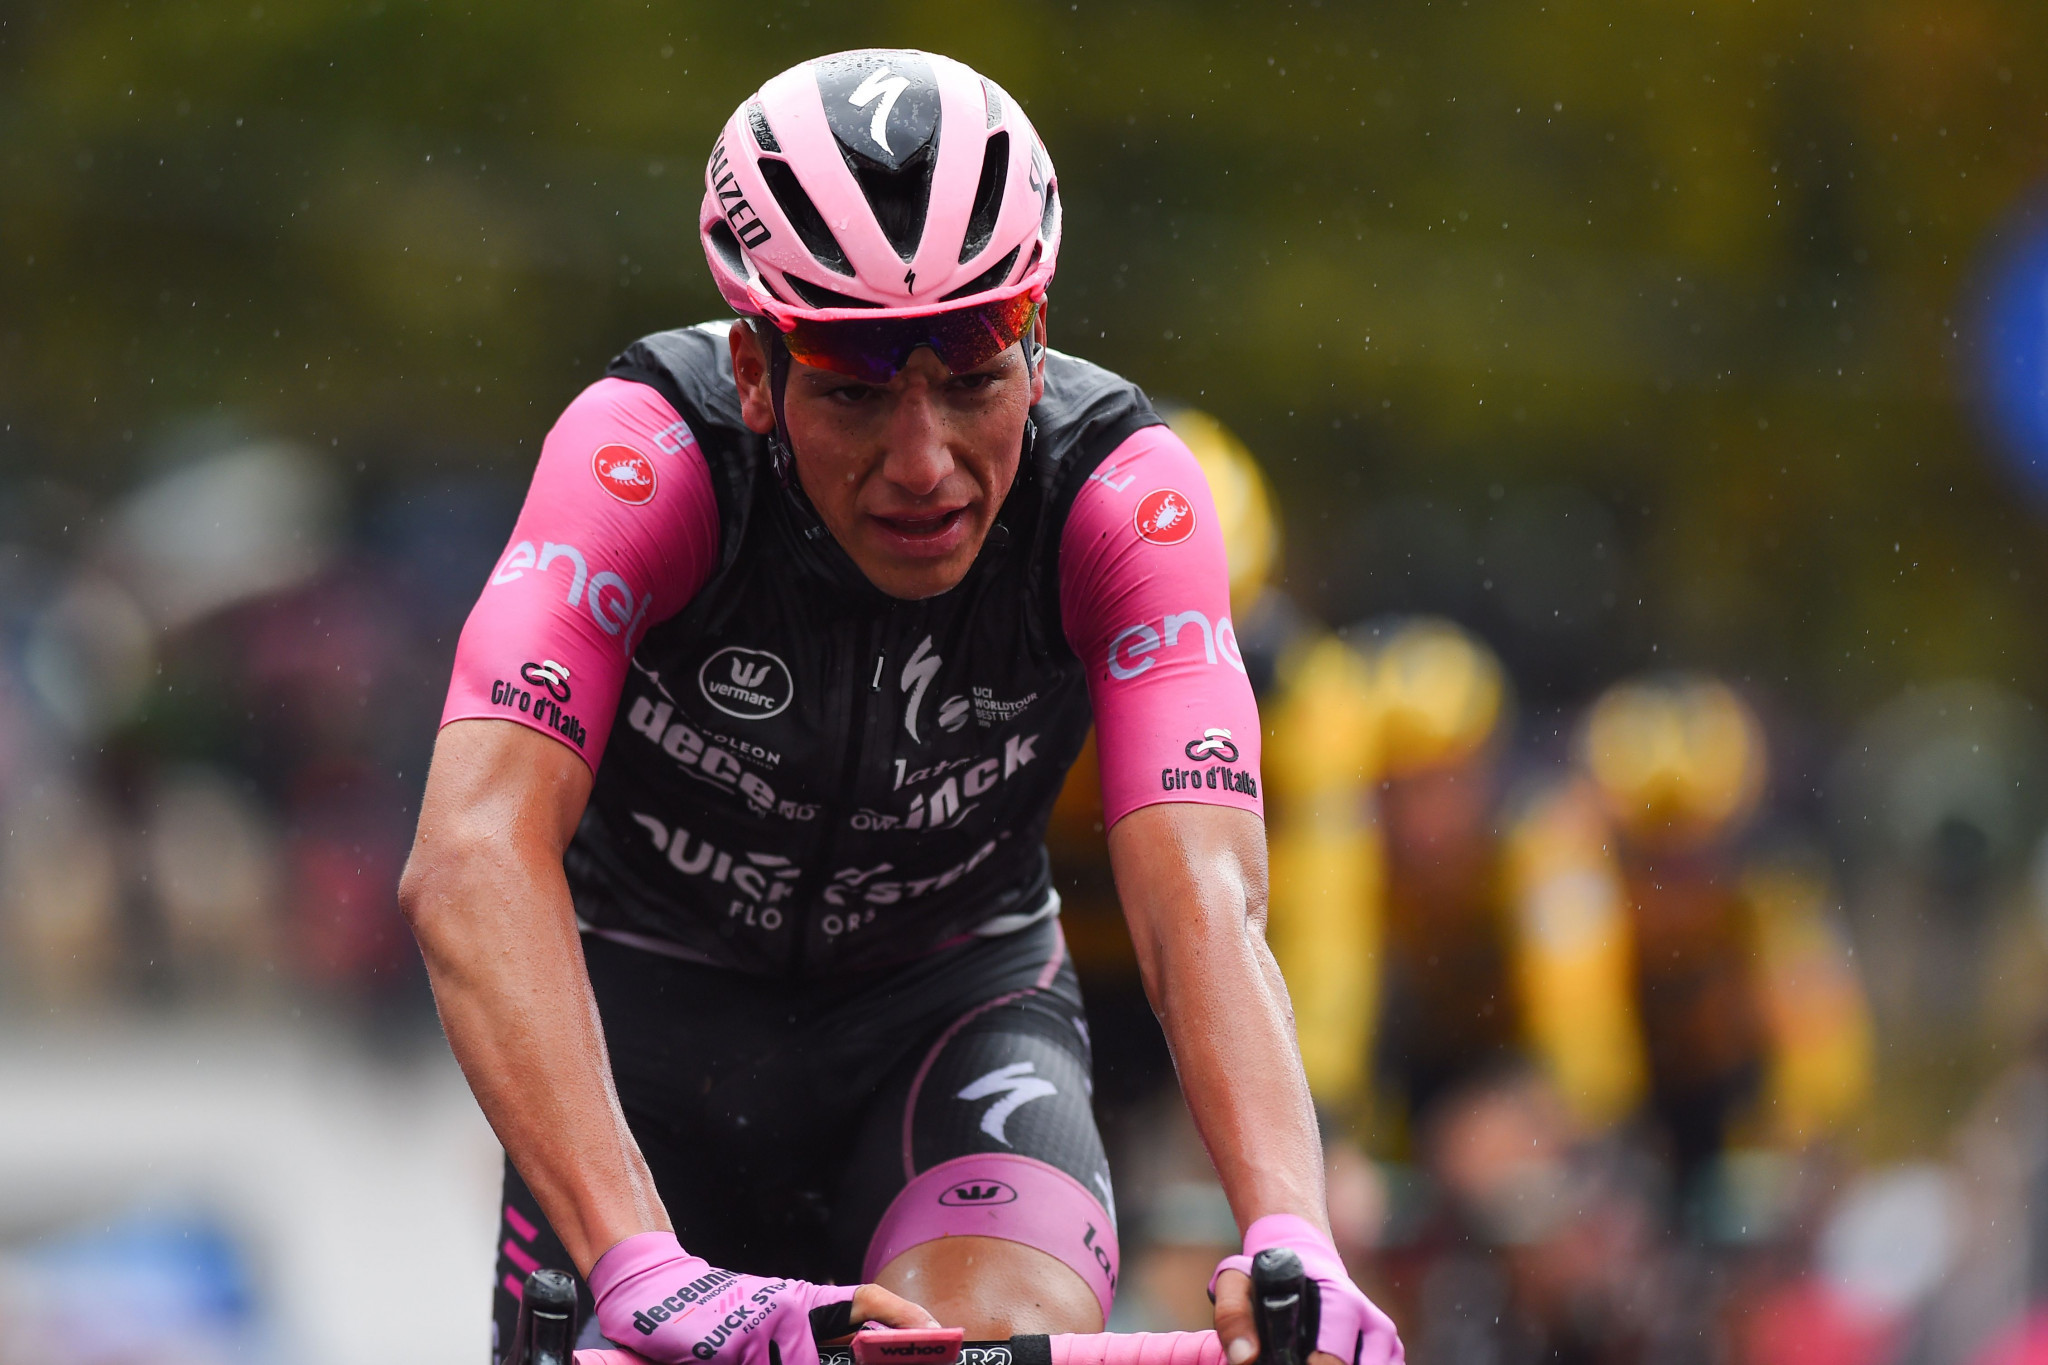 João Almeida, riding in his first Grand Tour, still leads the Giro d'Italia ©Getty Images